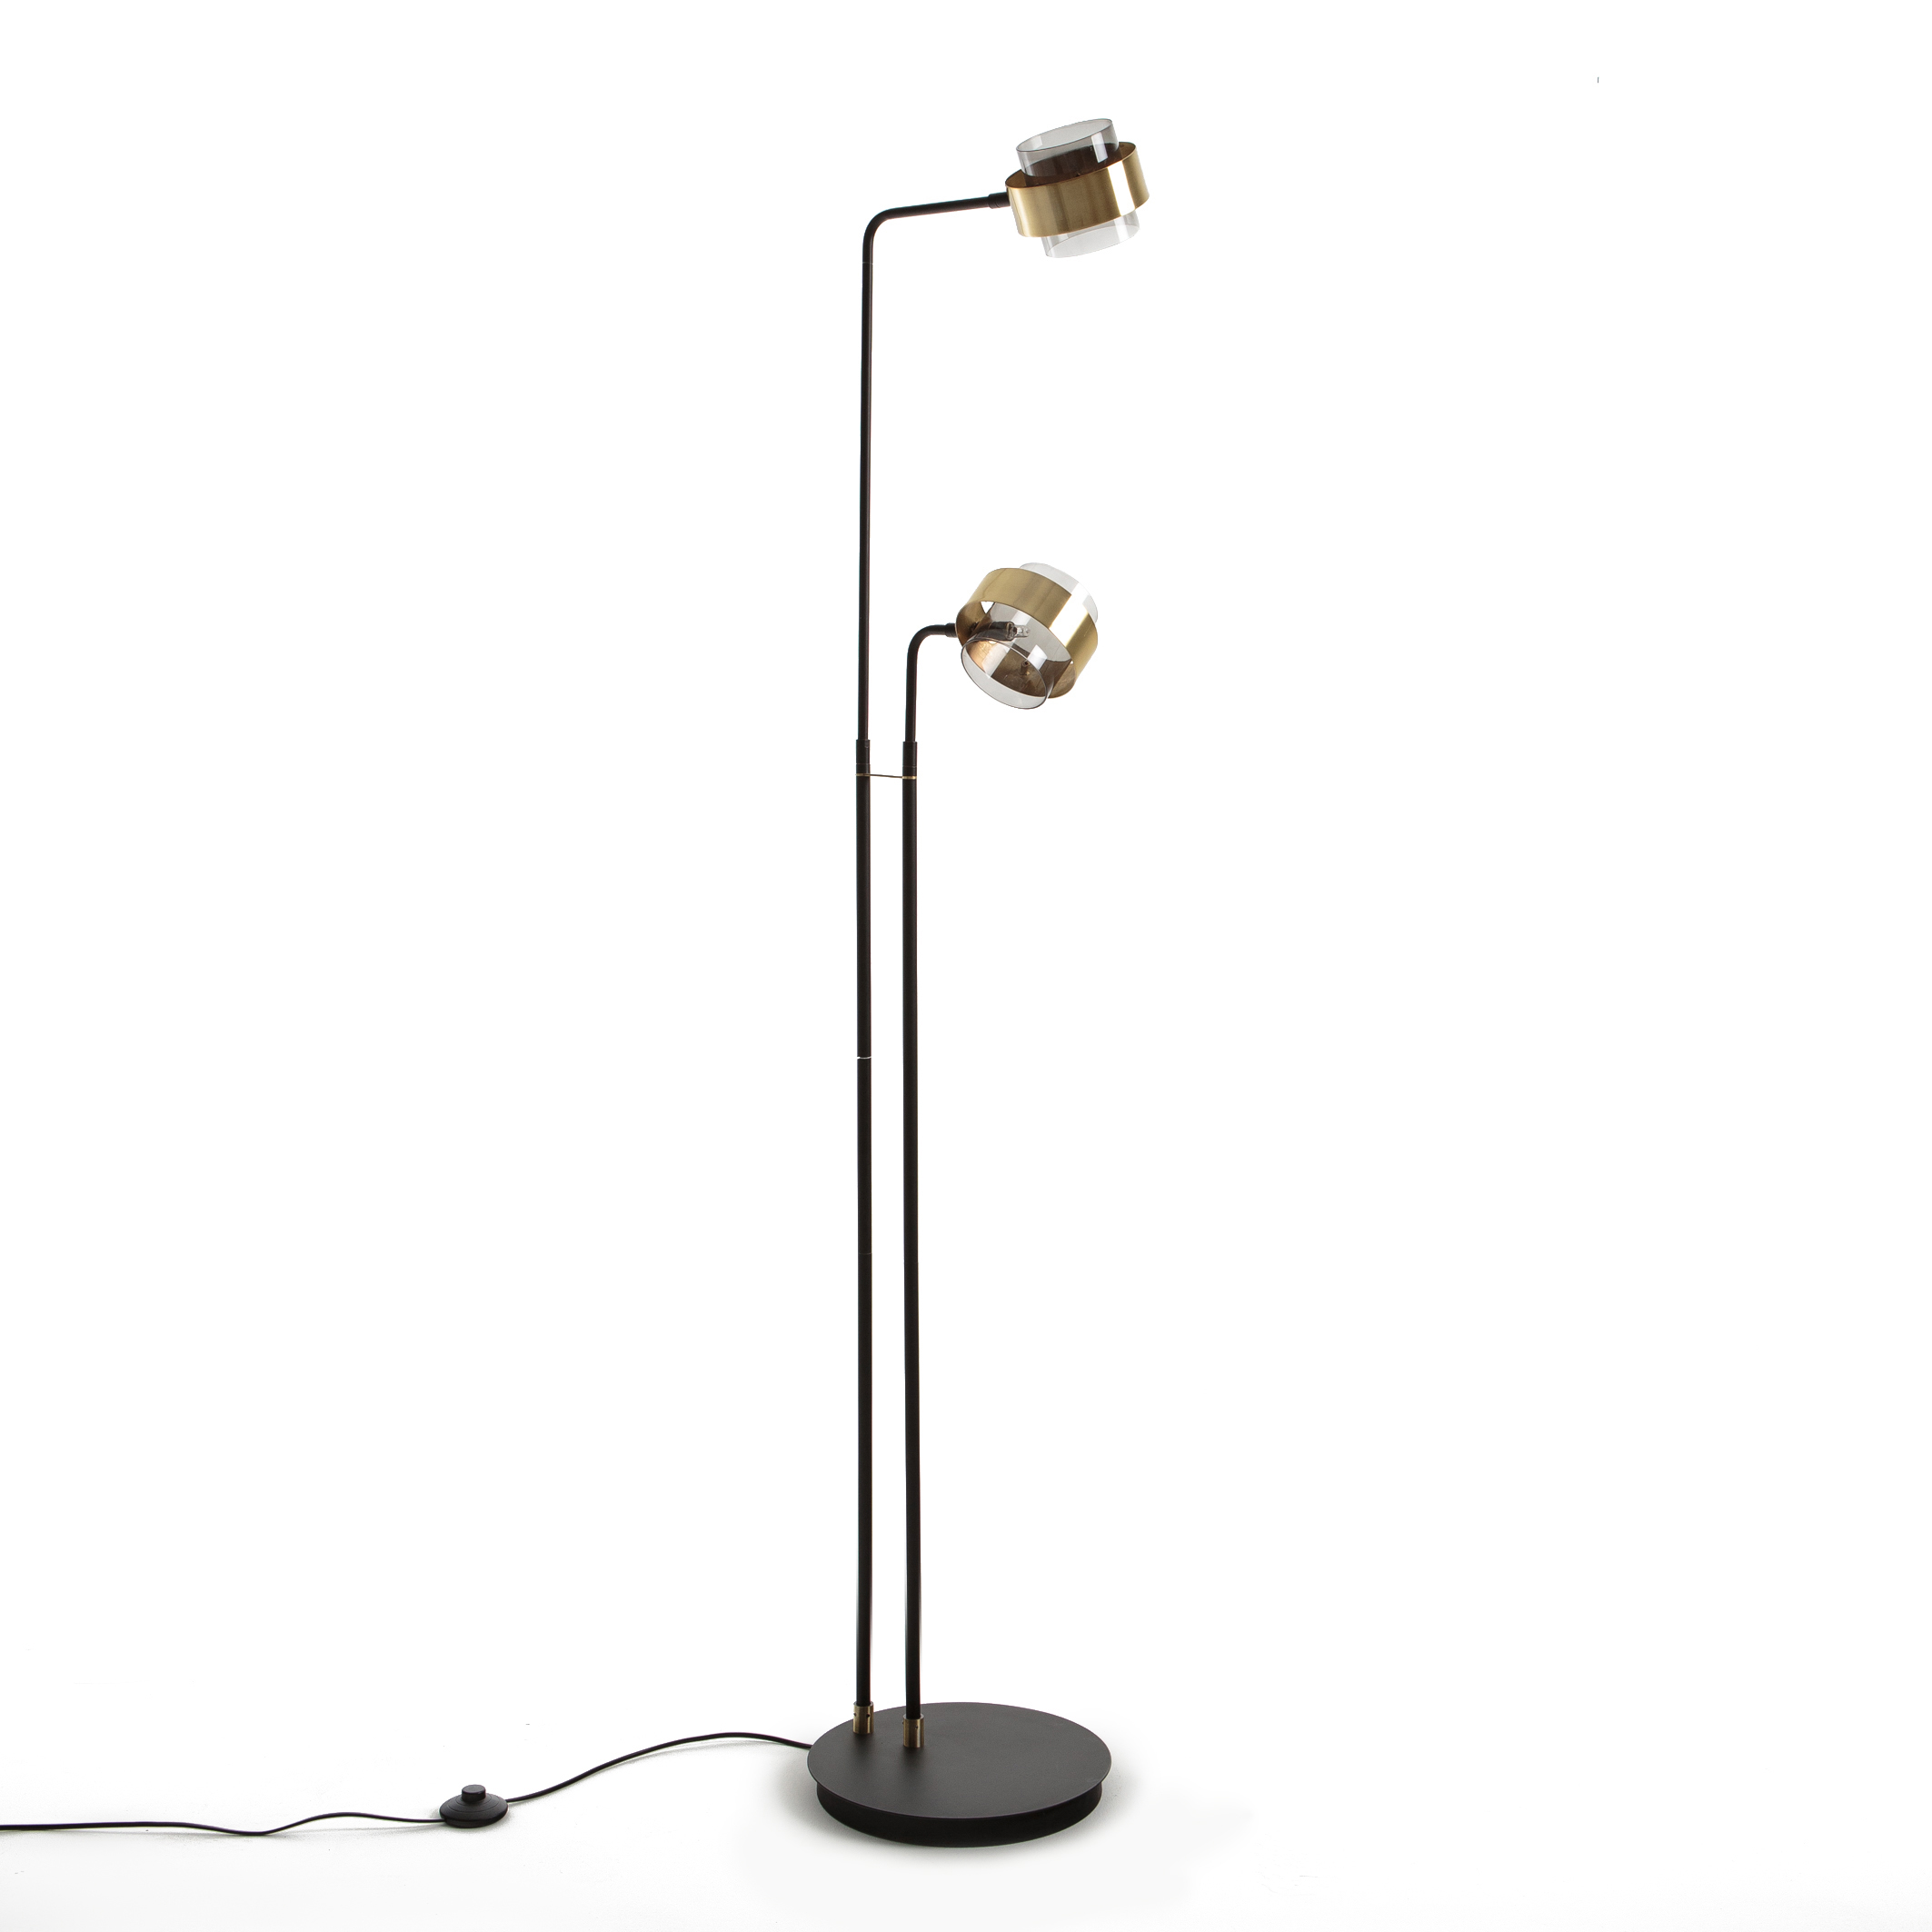 lamp adjustable & Redoute metal with black/brass reading La Interieurs arms La Redoute floor Botello glass |